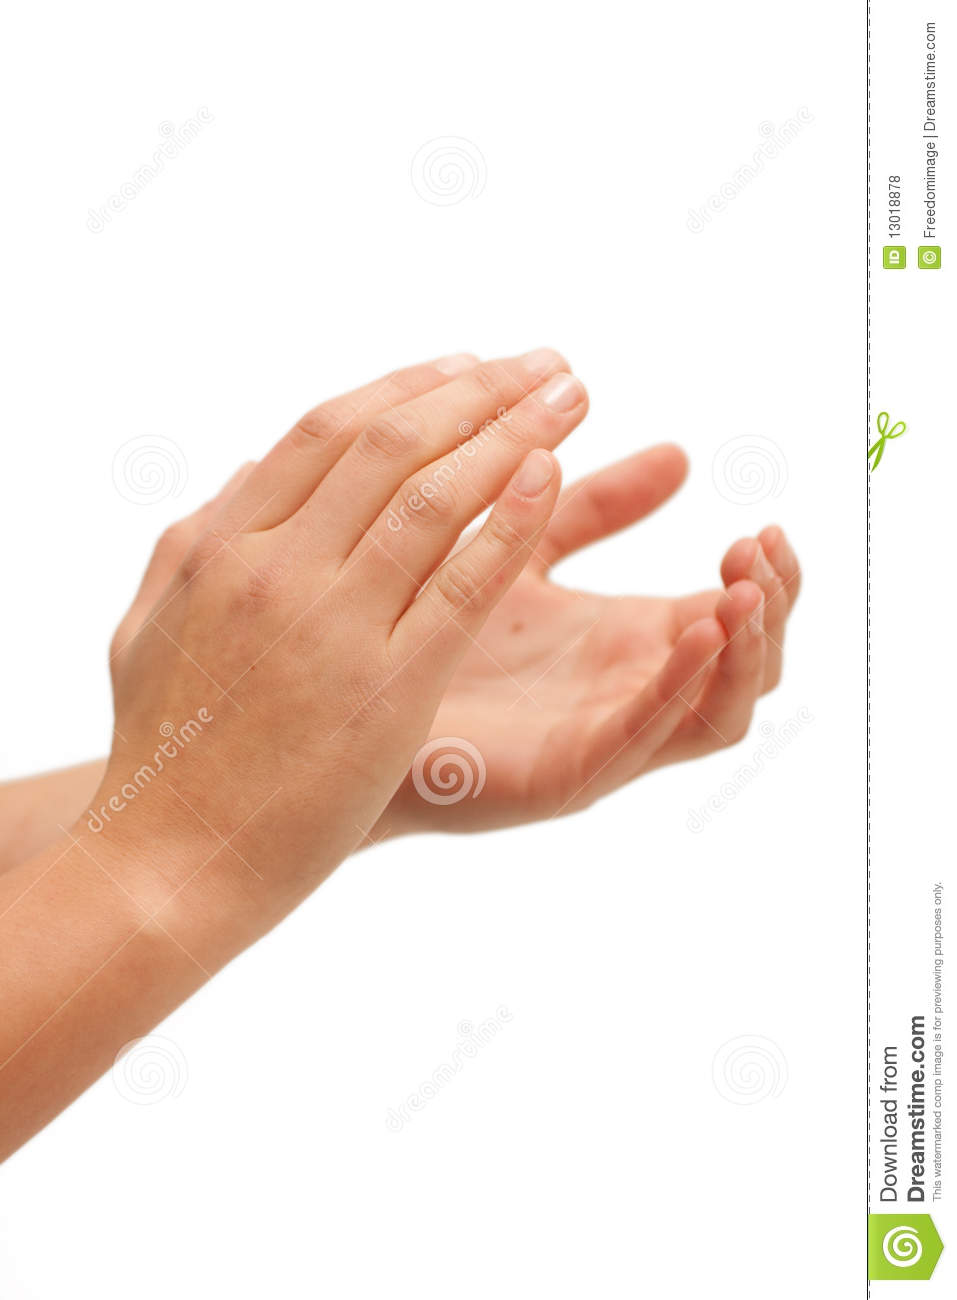 Clapping  Female Hands Clapping Royalty Free Stock Photos   Image